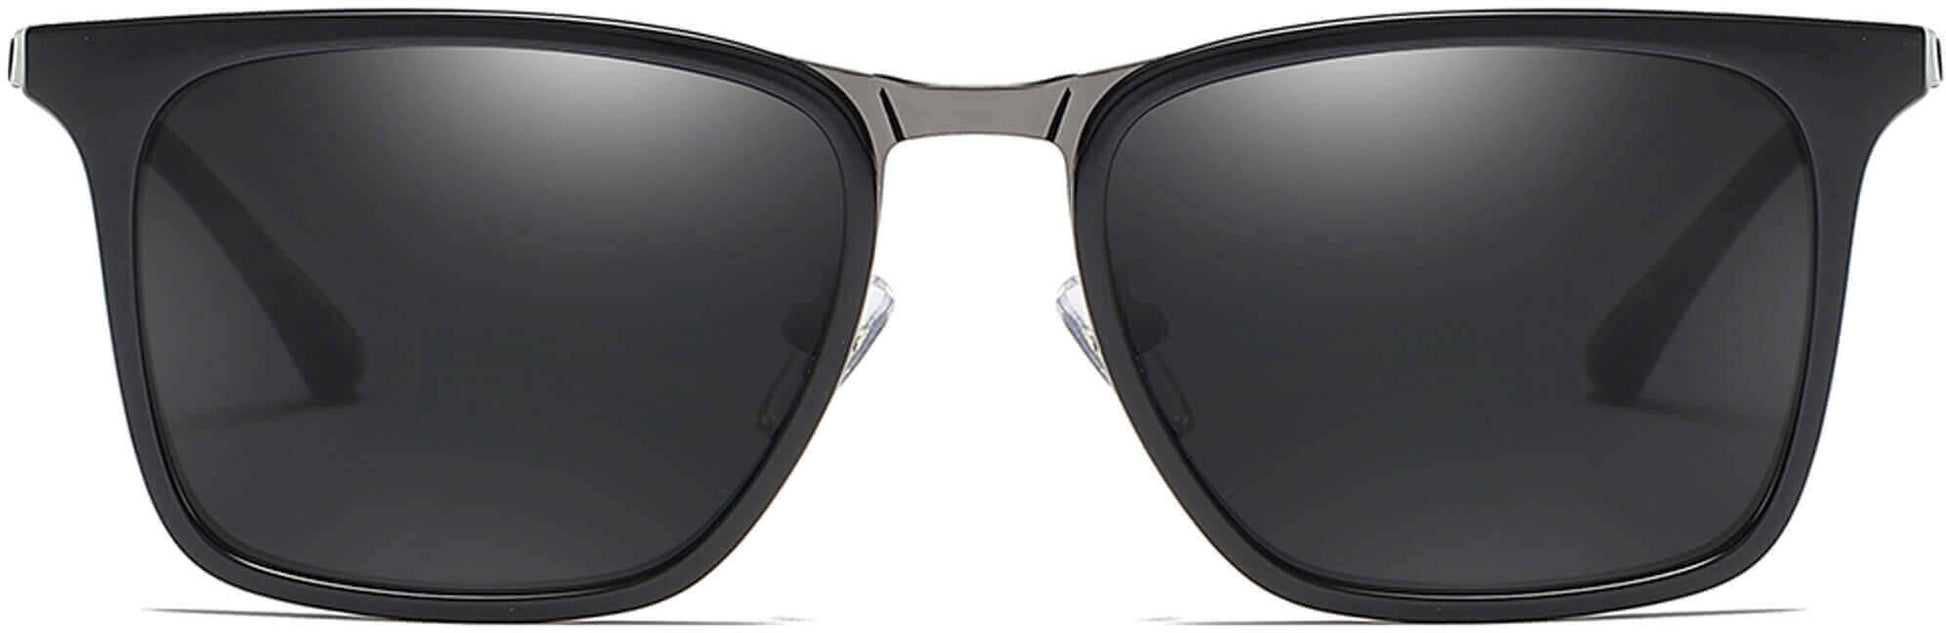 Chase Black Plastic Sunglasses from ANRRI, front view